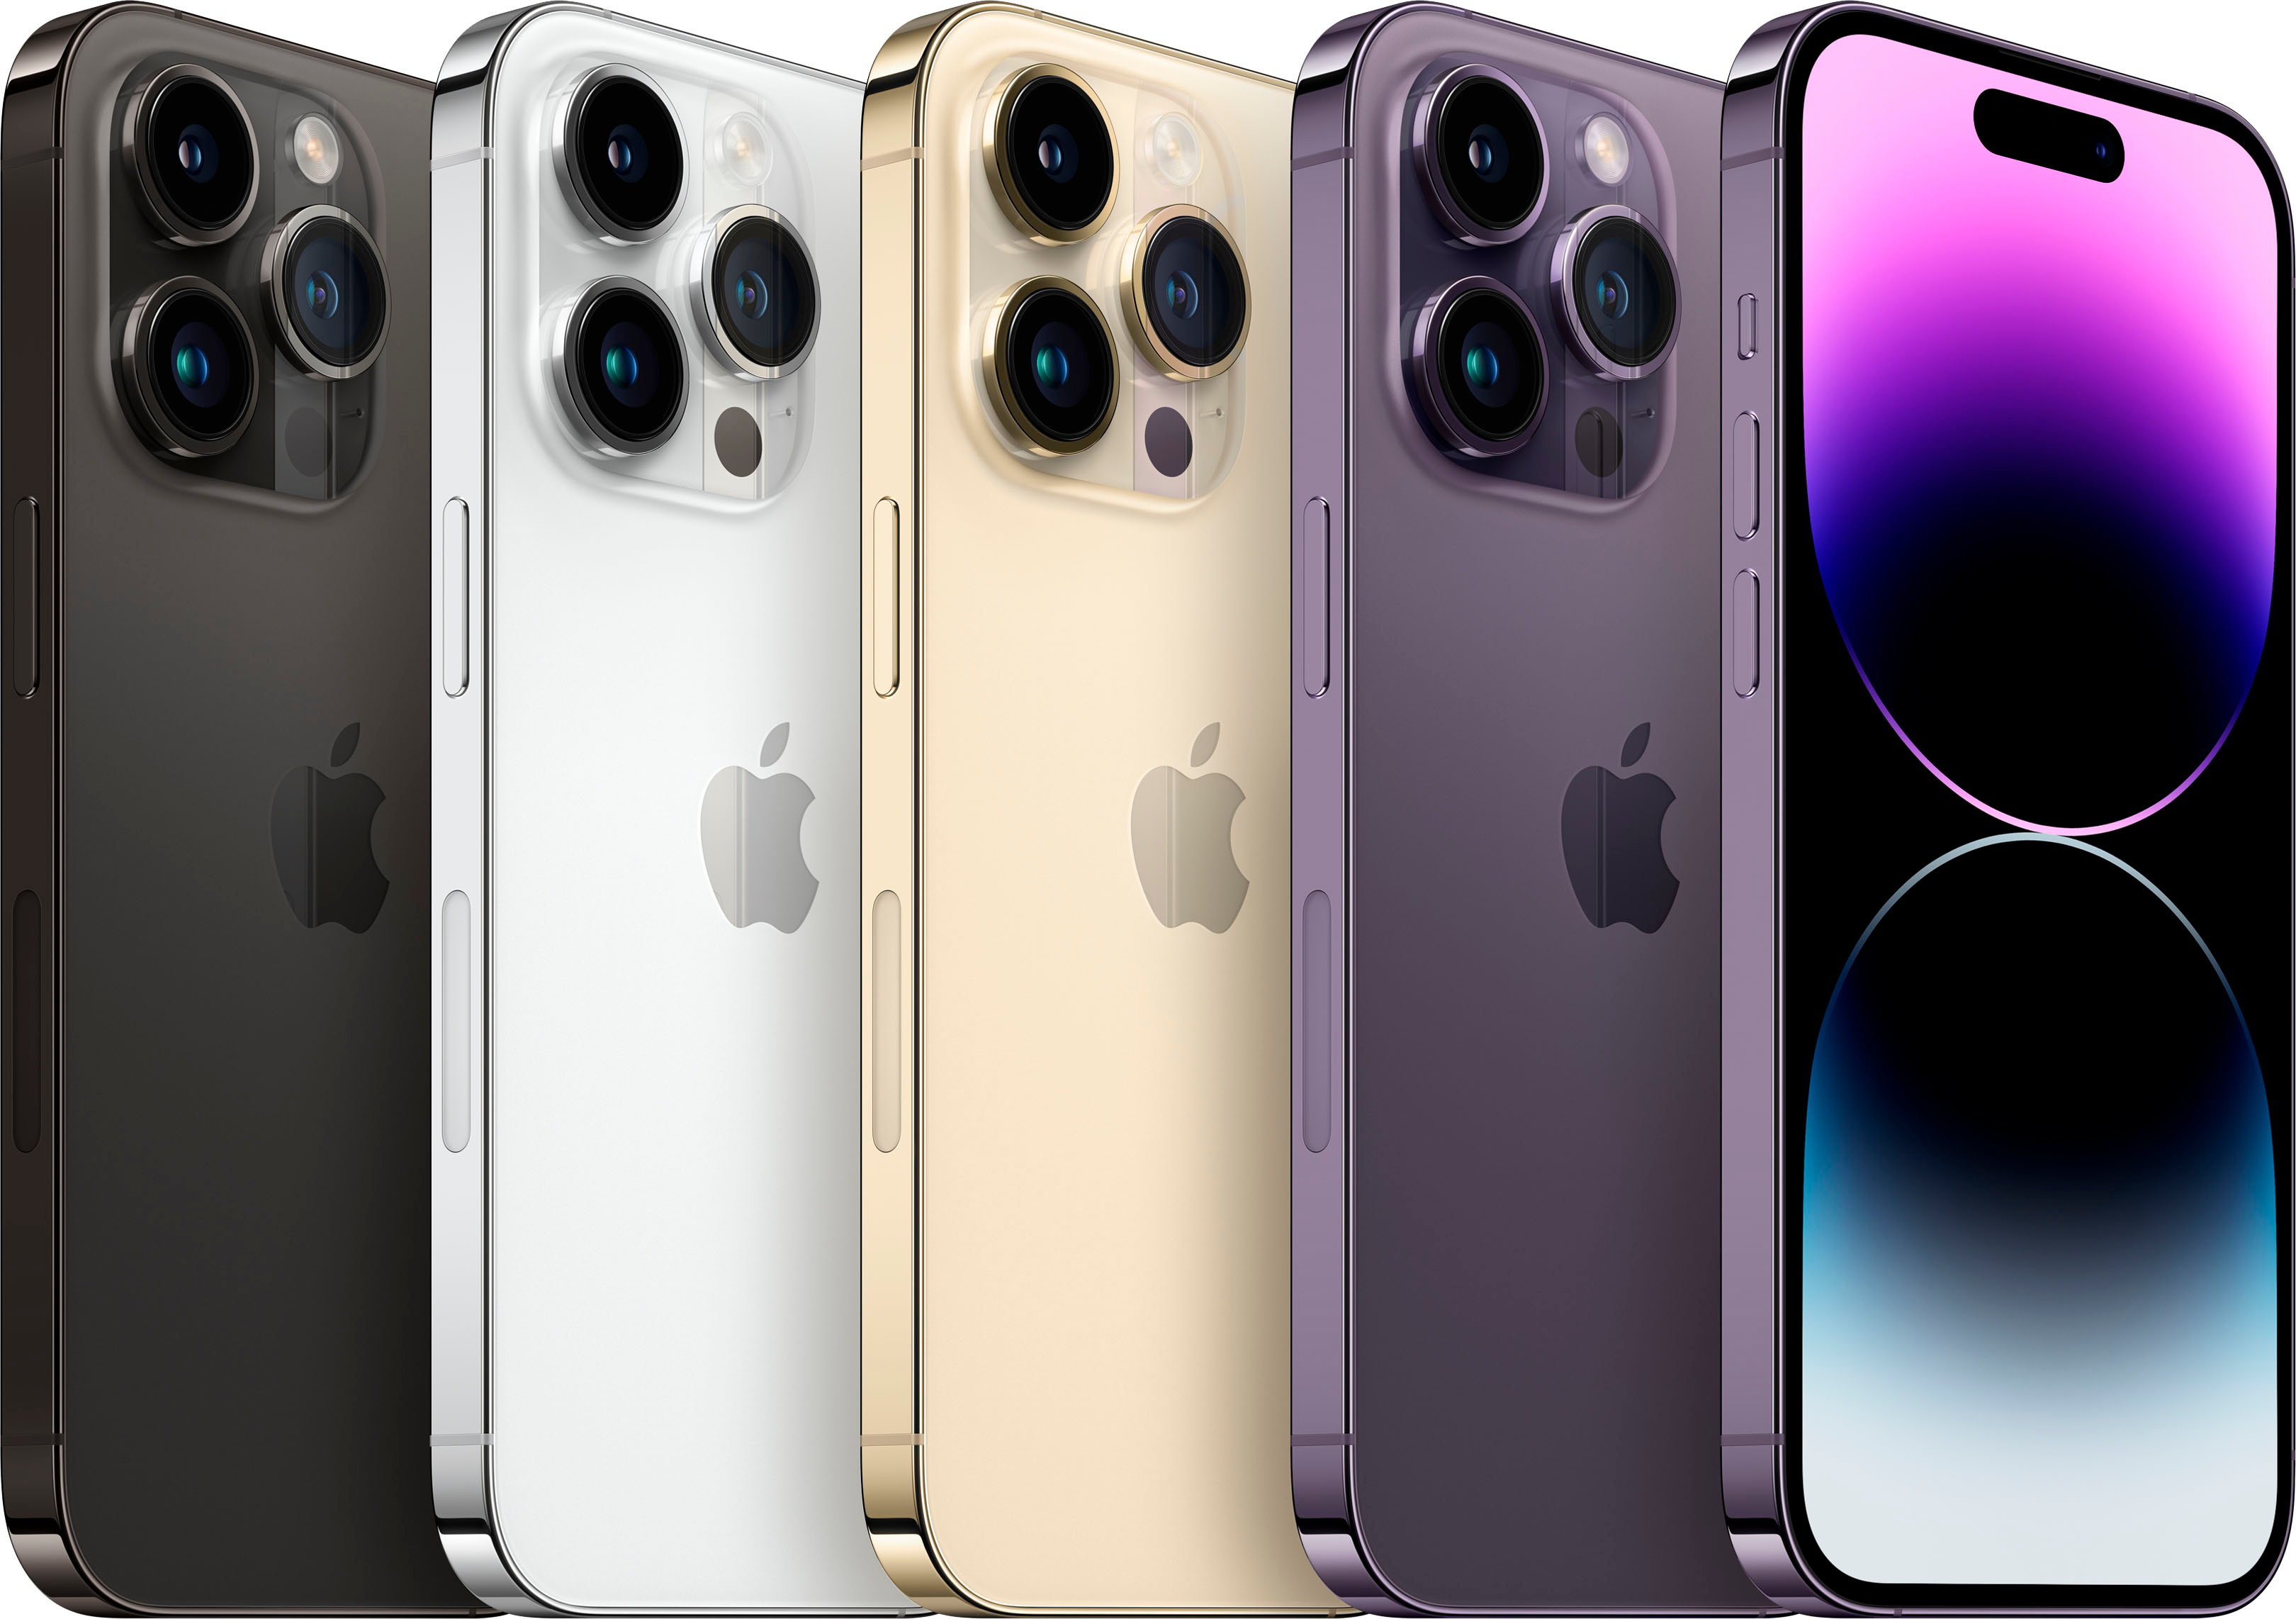 Is Apple's new iPhone 14 Pro actually 'deep purple' or another color?